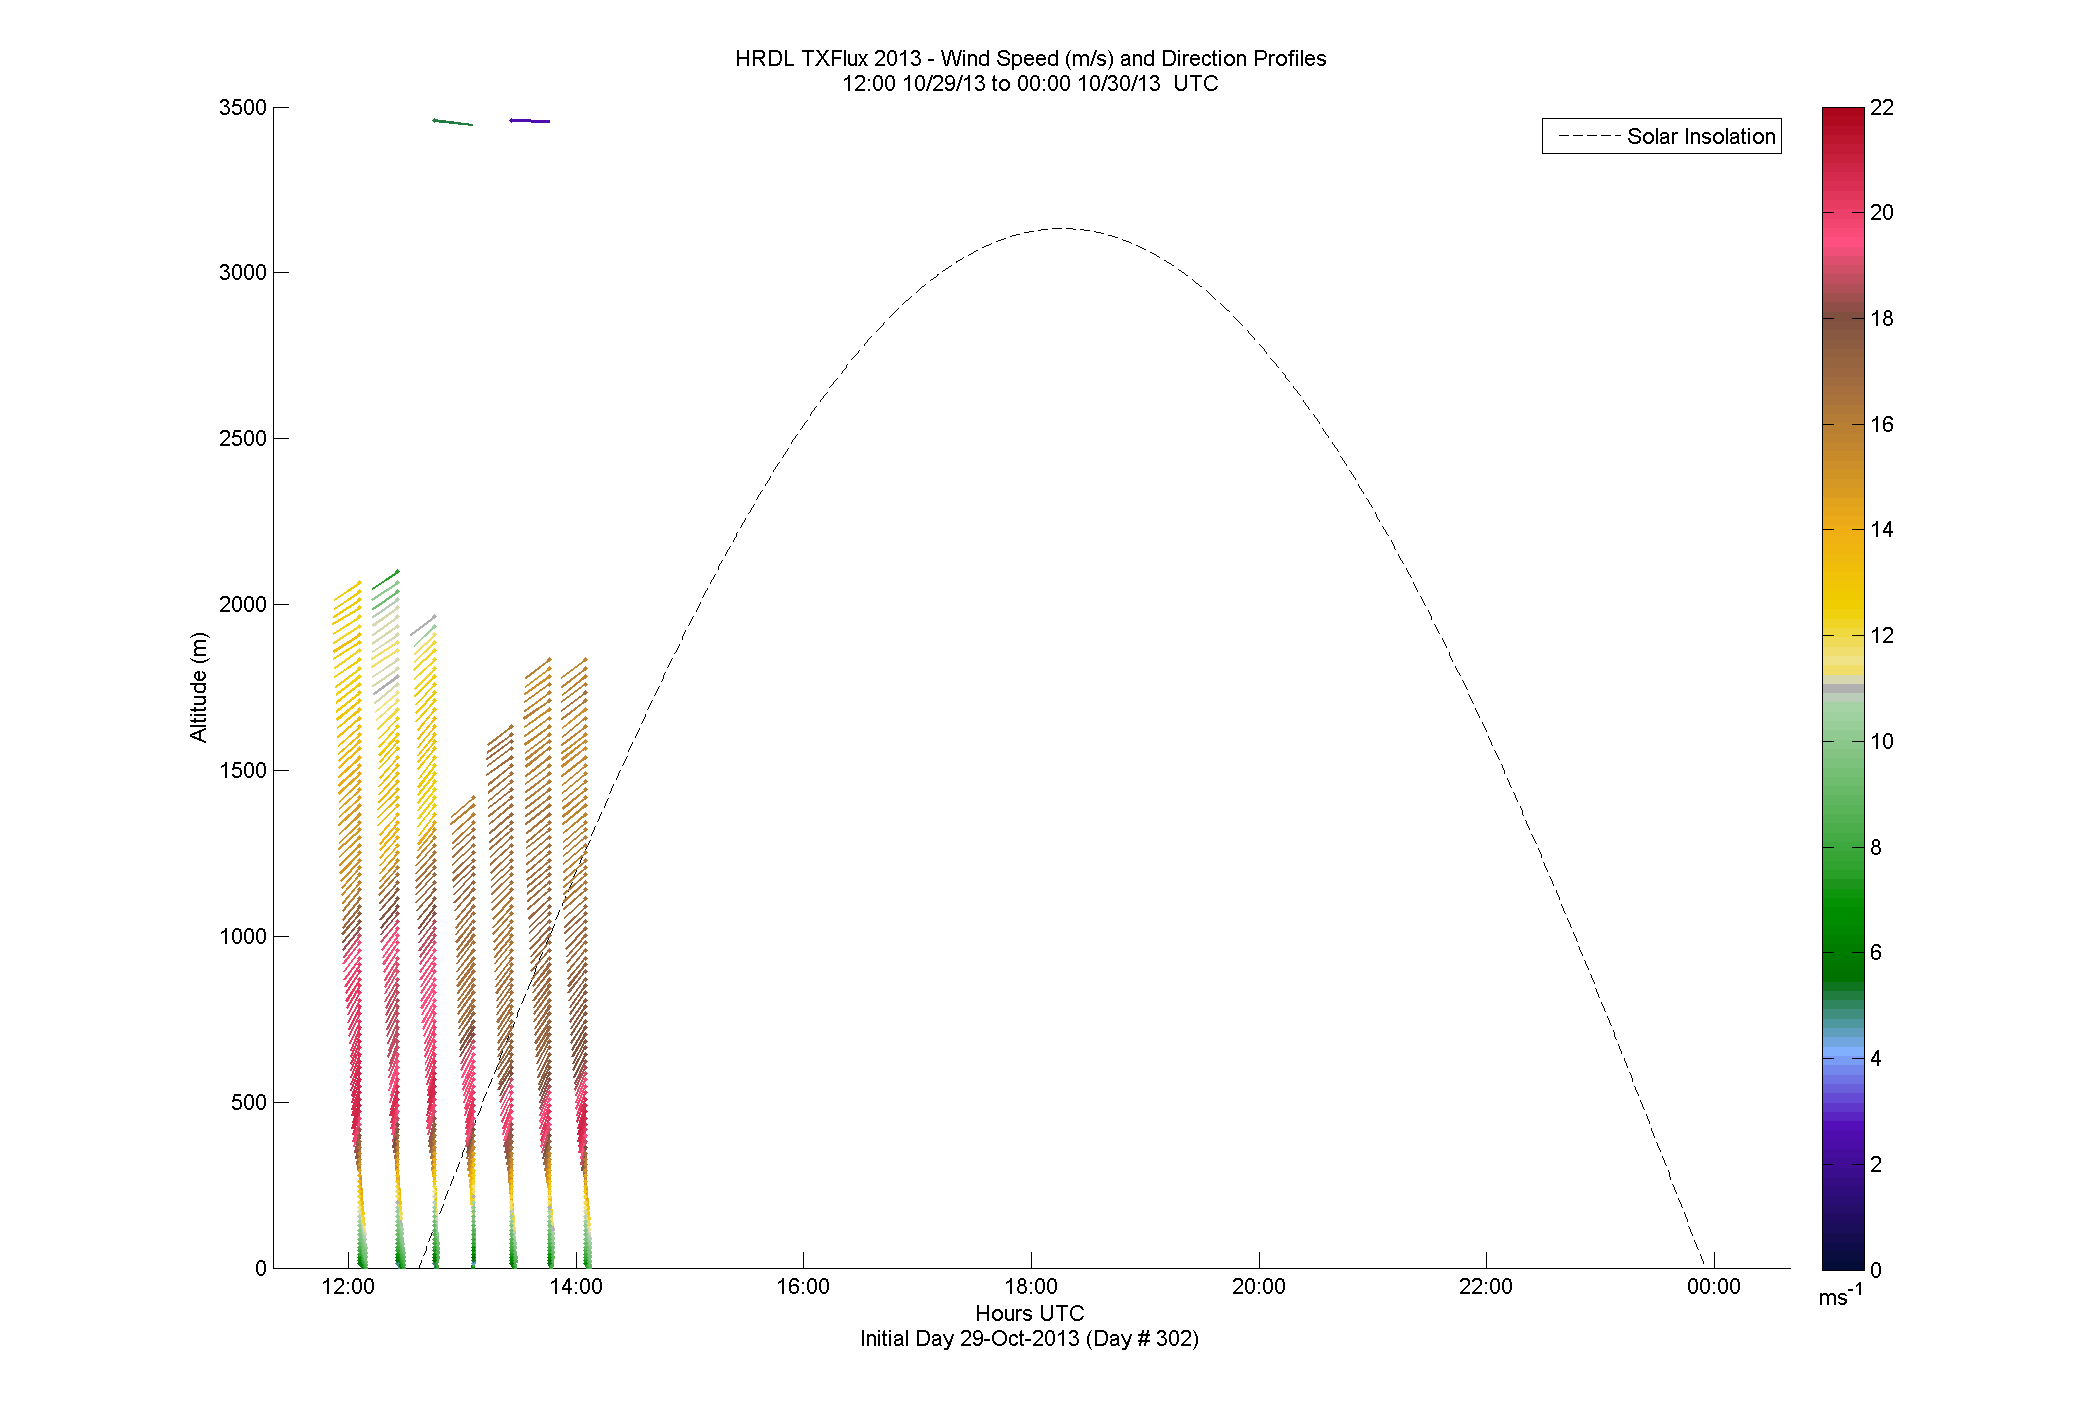 HRDL speed and direction profile - October 29 pm